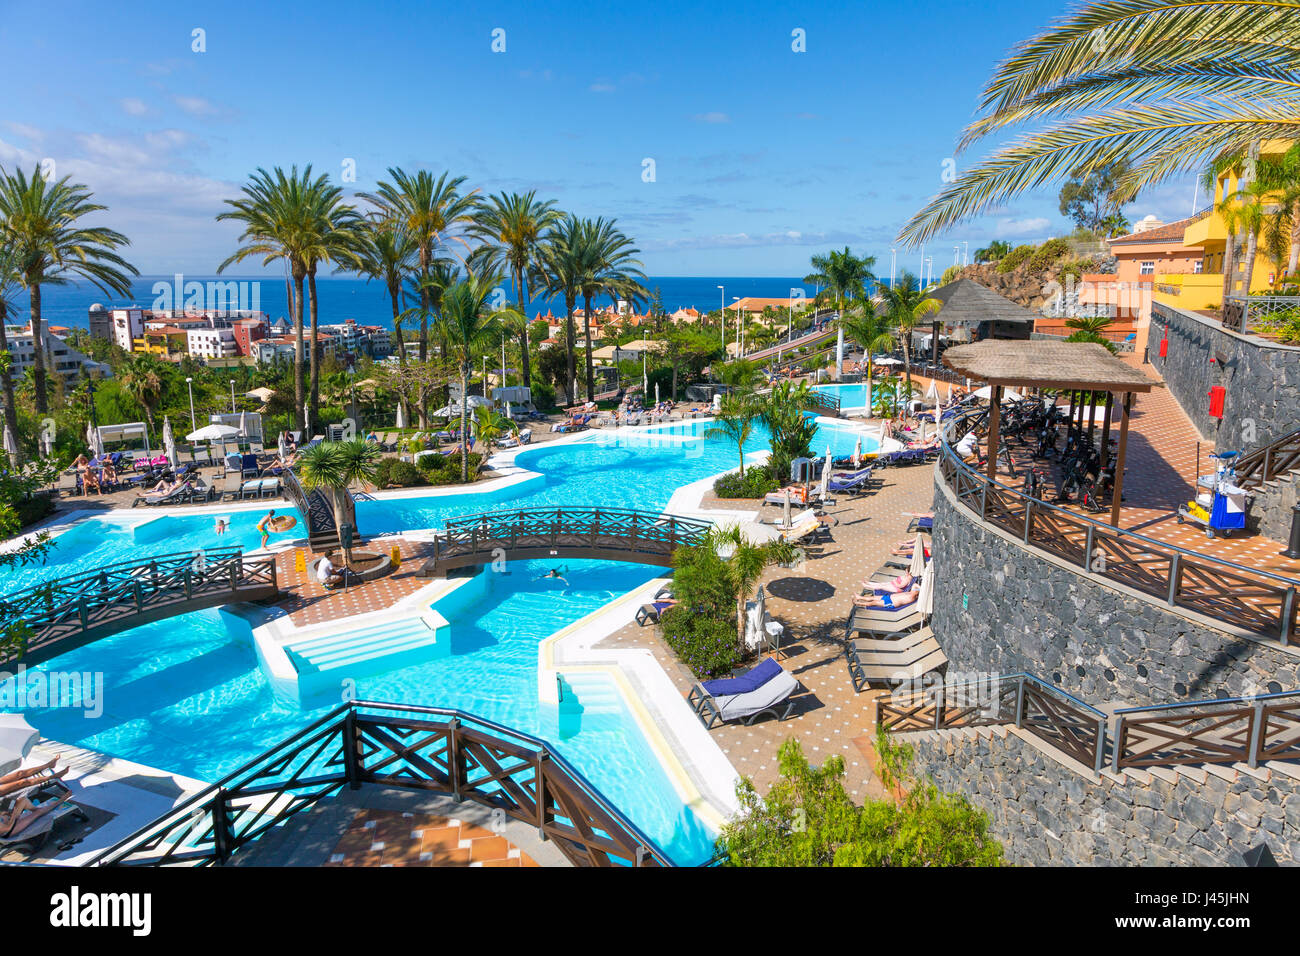 Hotel with swimming pool in Tenerife, Spain Stock Photo